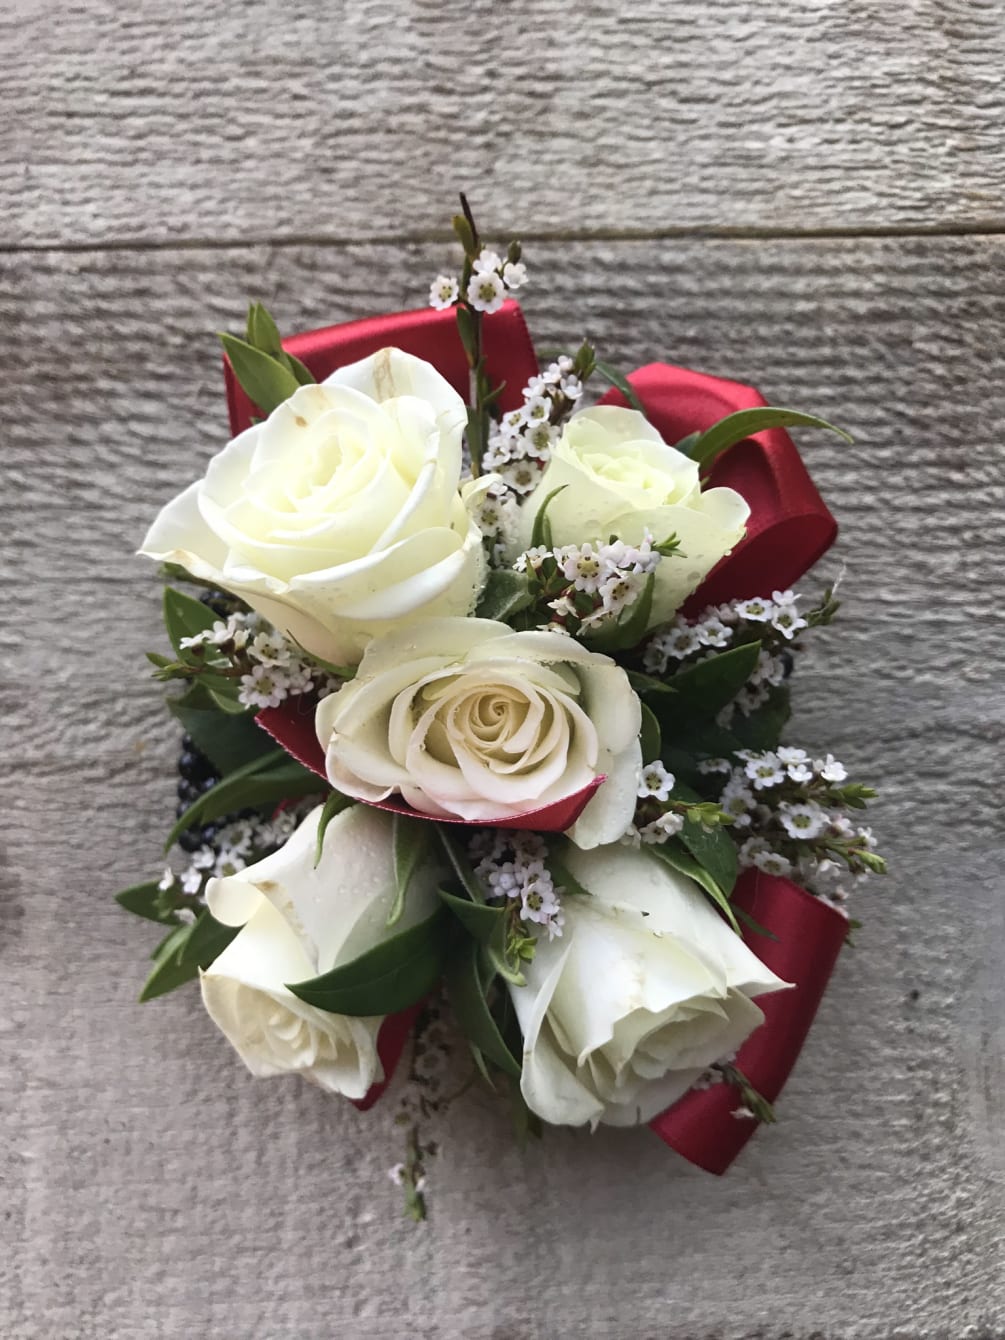 White Spray roses, greenery, filler with Red ribbon on pearl wristband. Greenery